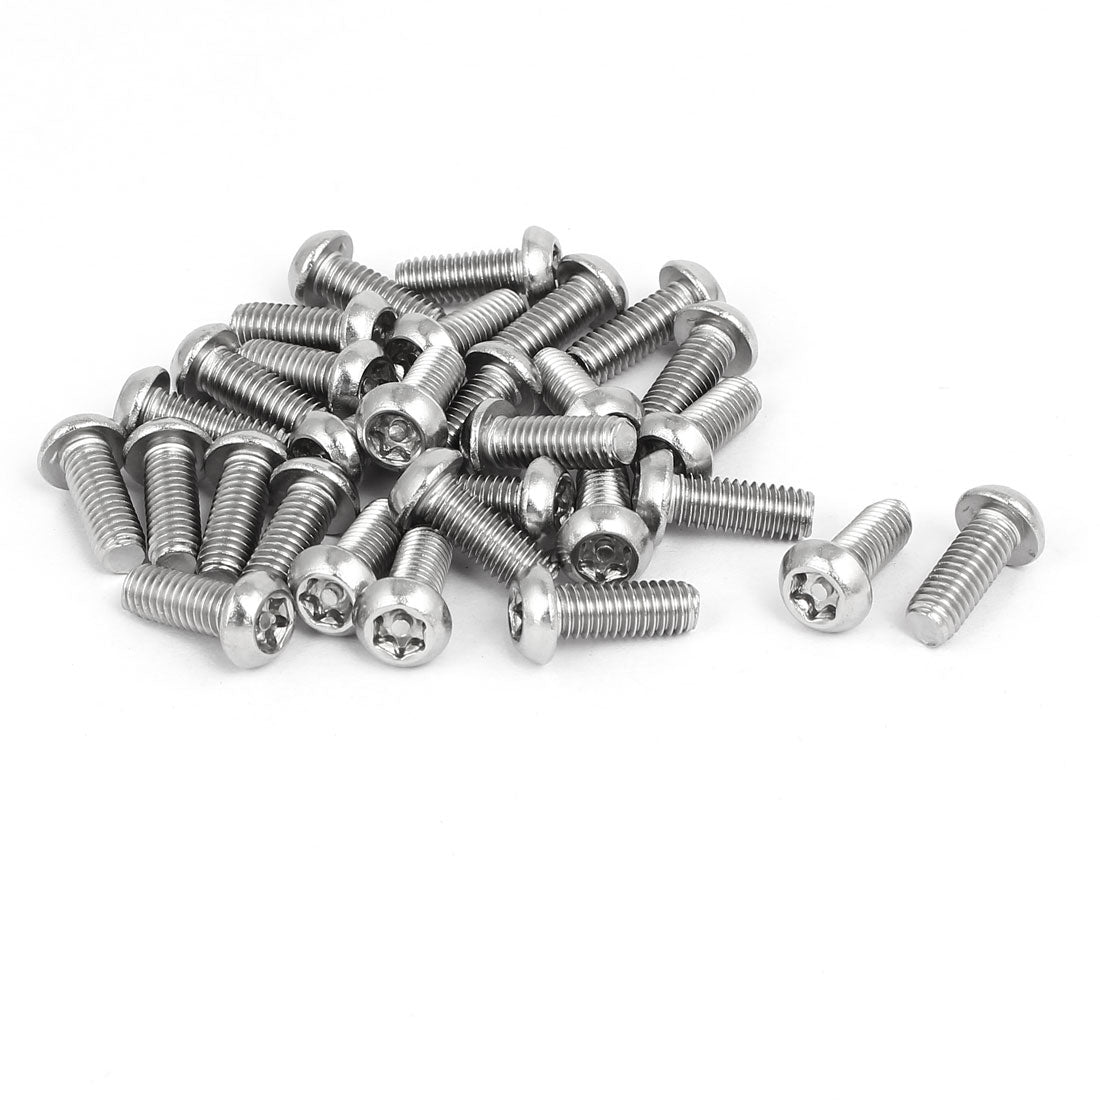 uxcell Uxcell M6x16mm 304 Stainless Steel Button Head Torx Security Tamper Proof Screws 30pcs